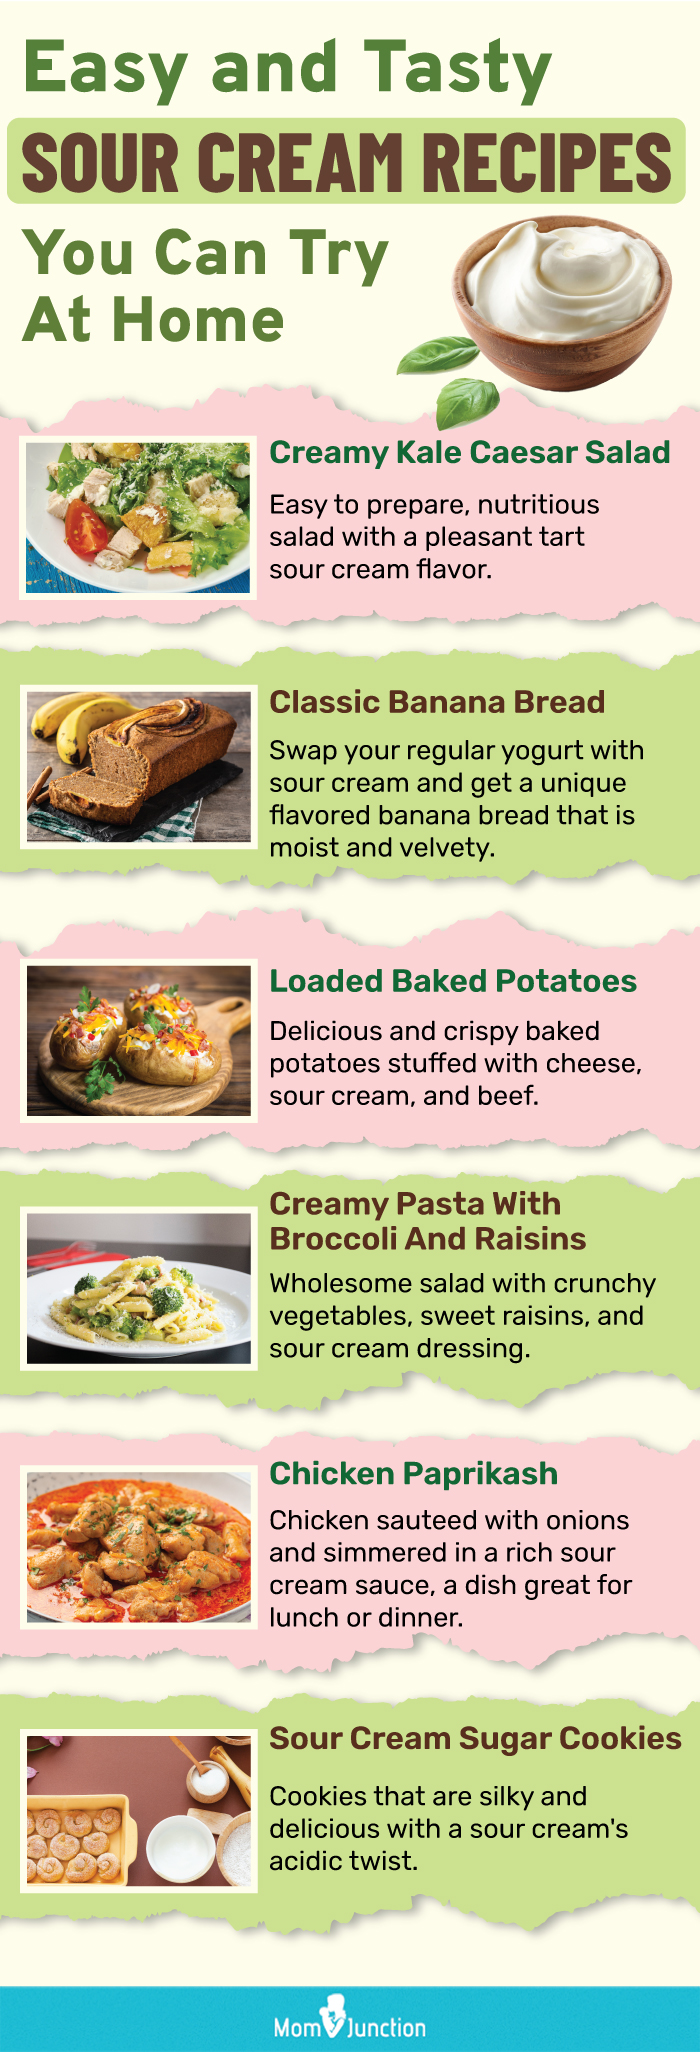 sour cream recipes to try during pregnancy (infographic)